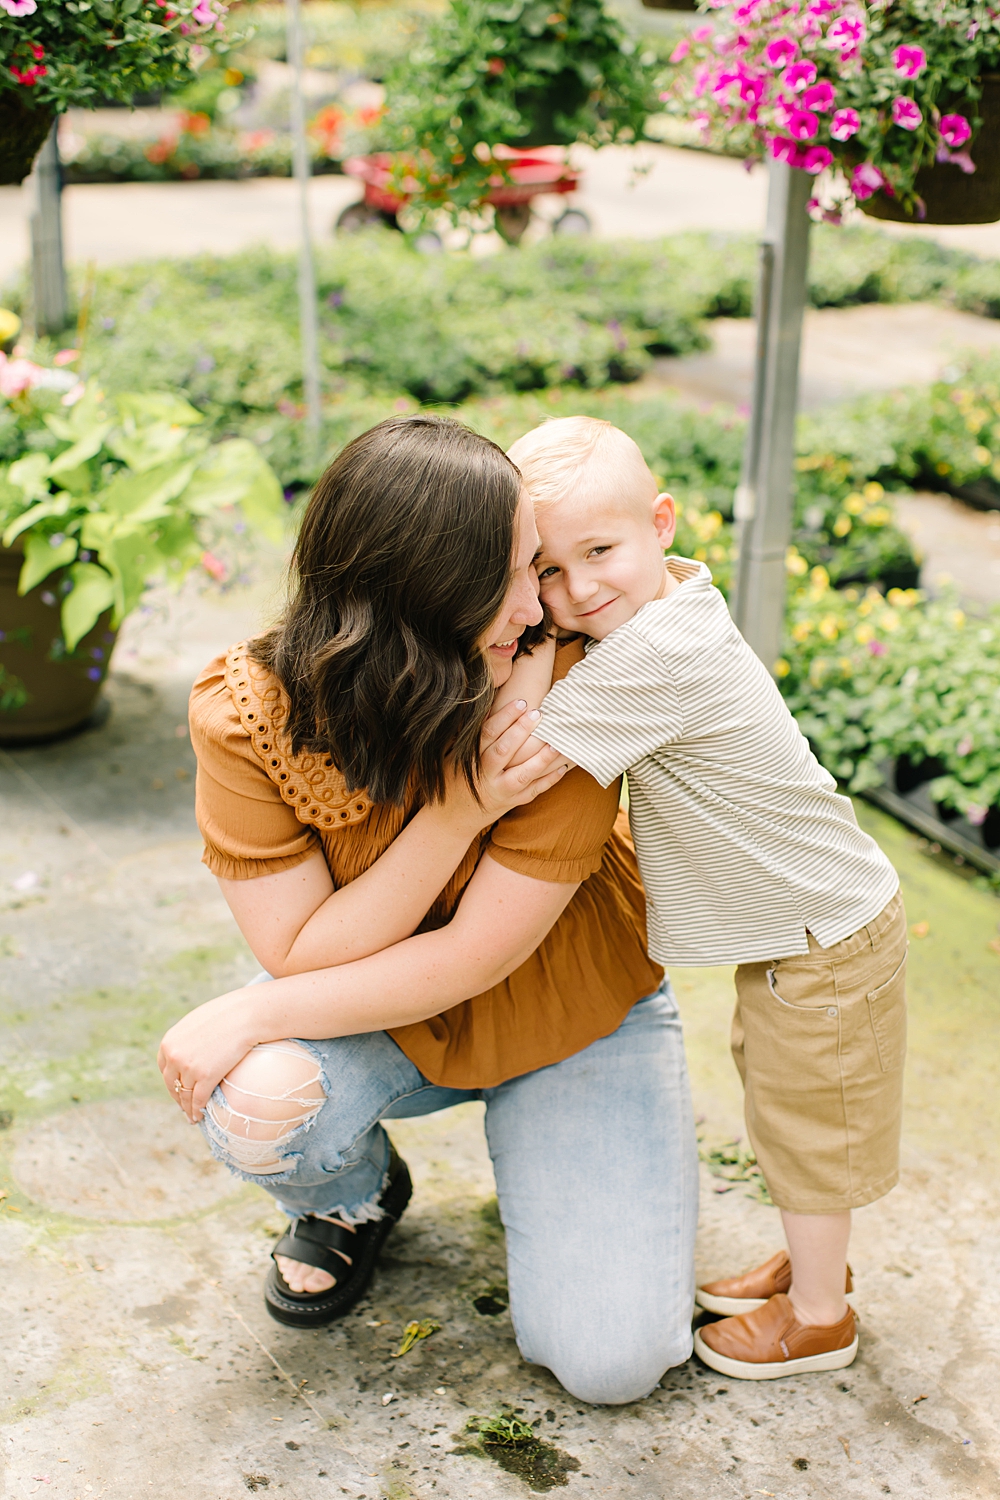 Family Photos at Cook's Greenhouse | Orem Photographer